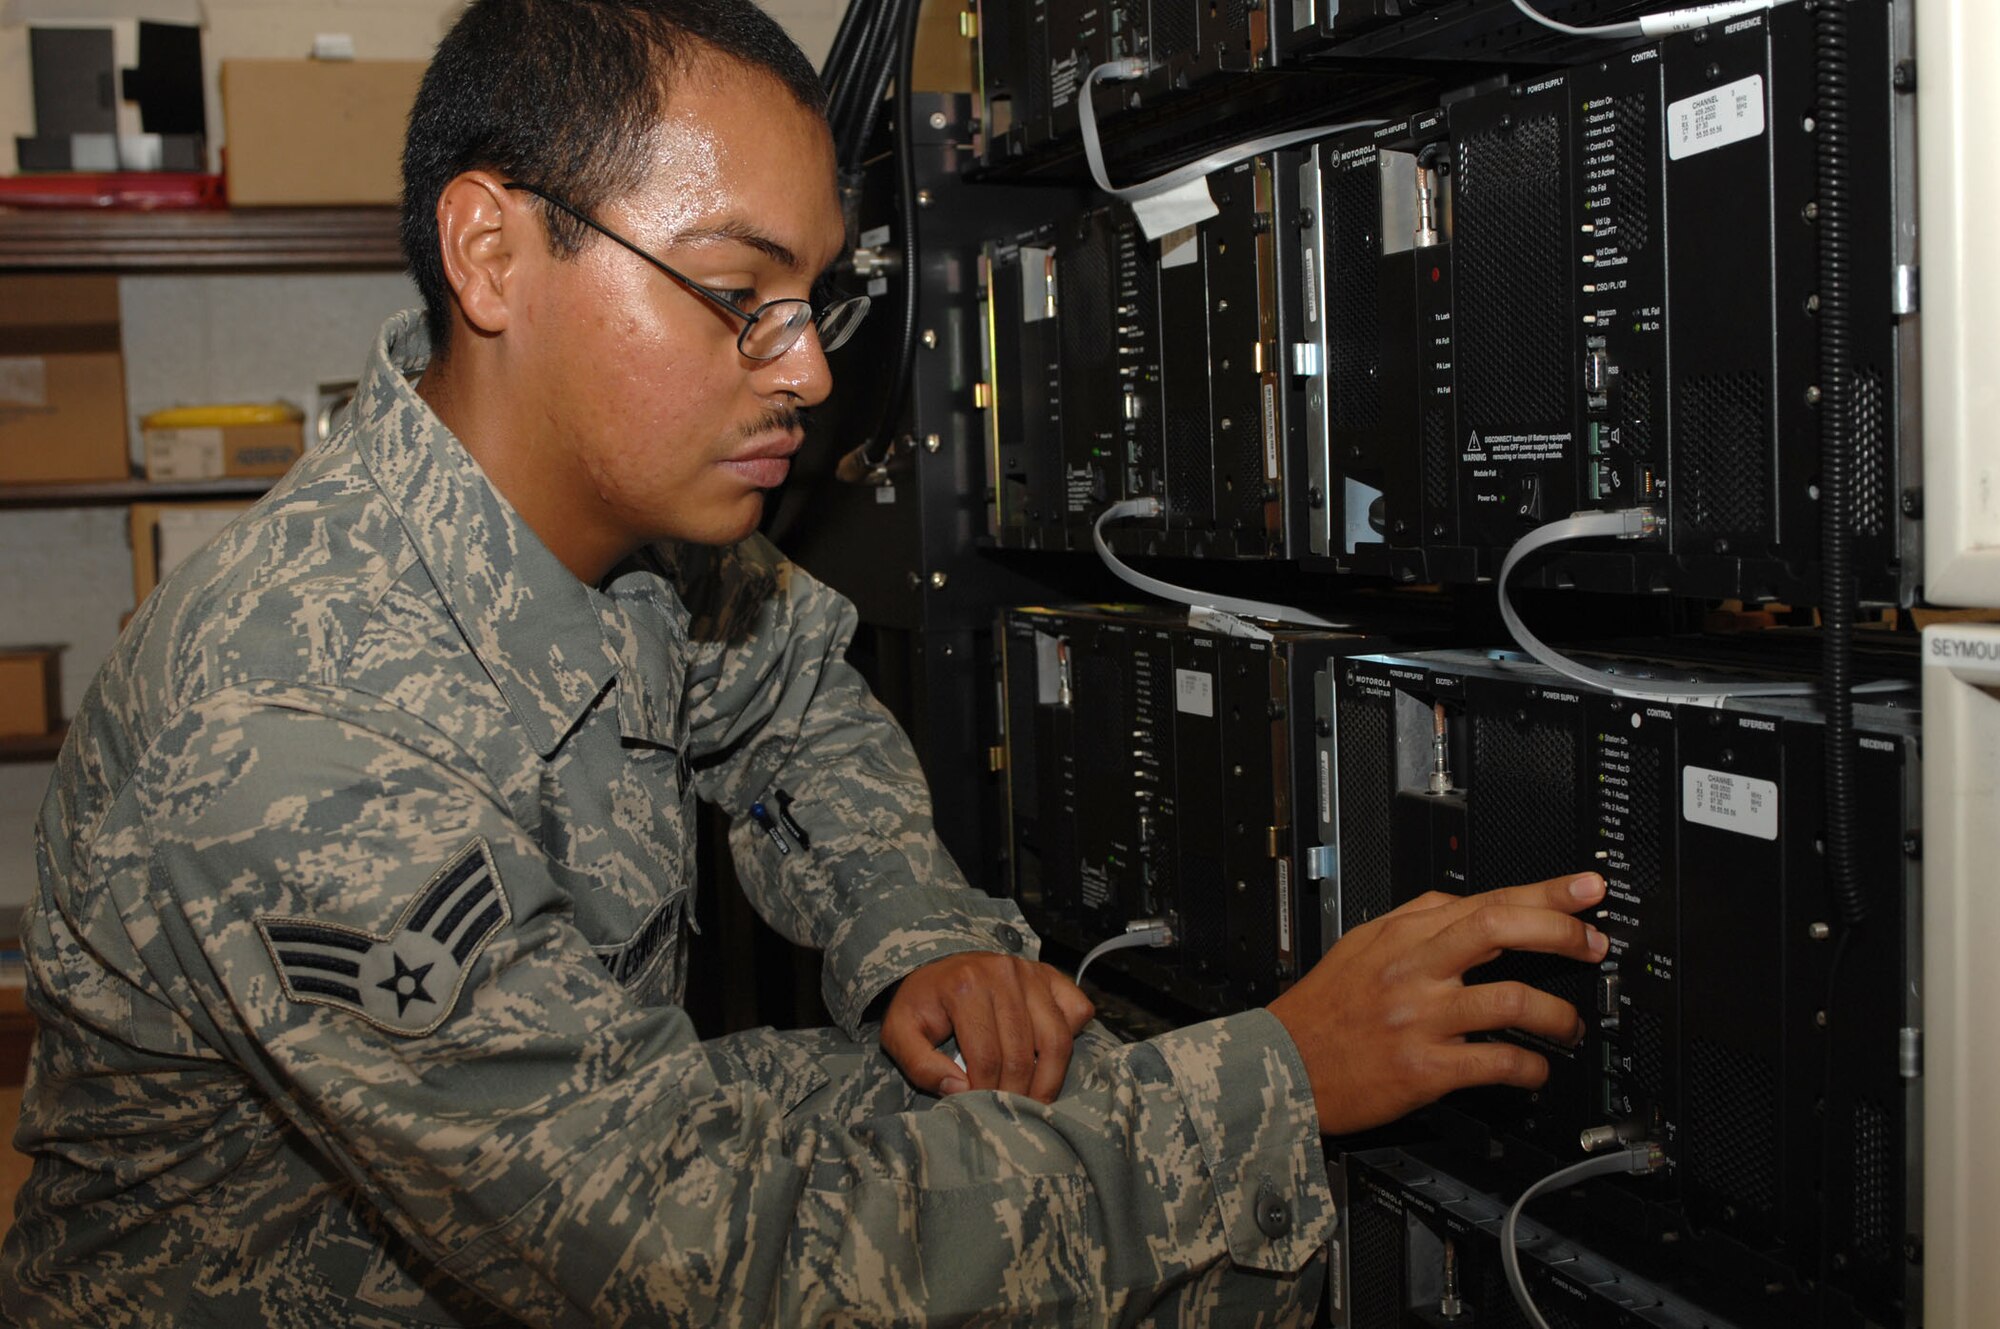 Senior Airman Jose Charlesworth, 4th Communications Squadron radio technician, disables a control channel in a trunk site repeater on Seymour Johnson Air Force Base, N.C., Sept. 16, 2009. Repeaters are the backbone of the land mobile radio system because they control the operation of radio channels. (U.S. Air Force photo by Staff Sgt. Heather Stanton)